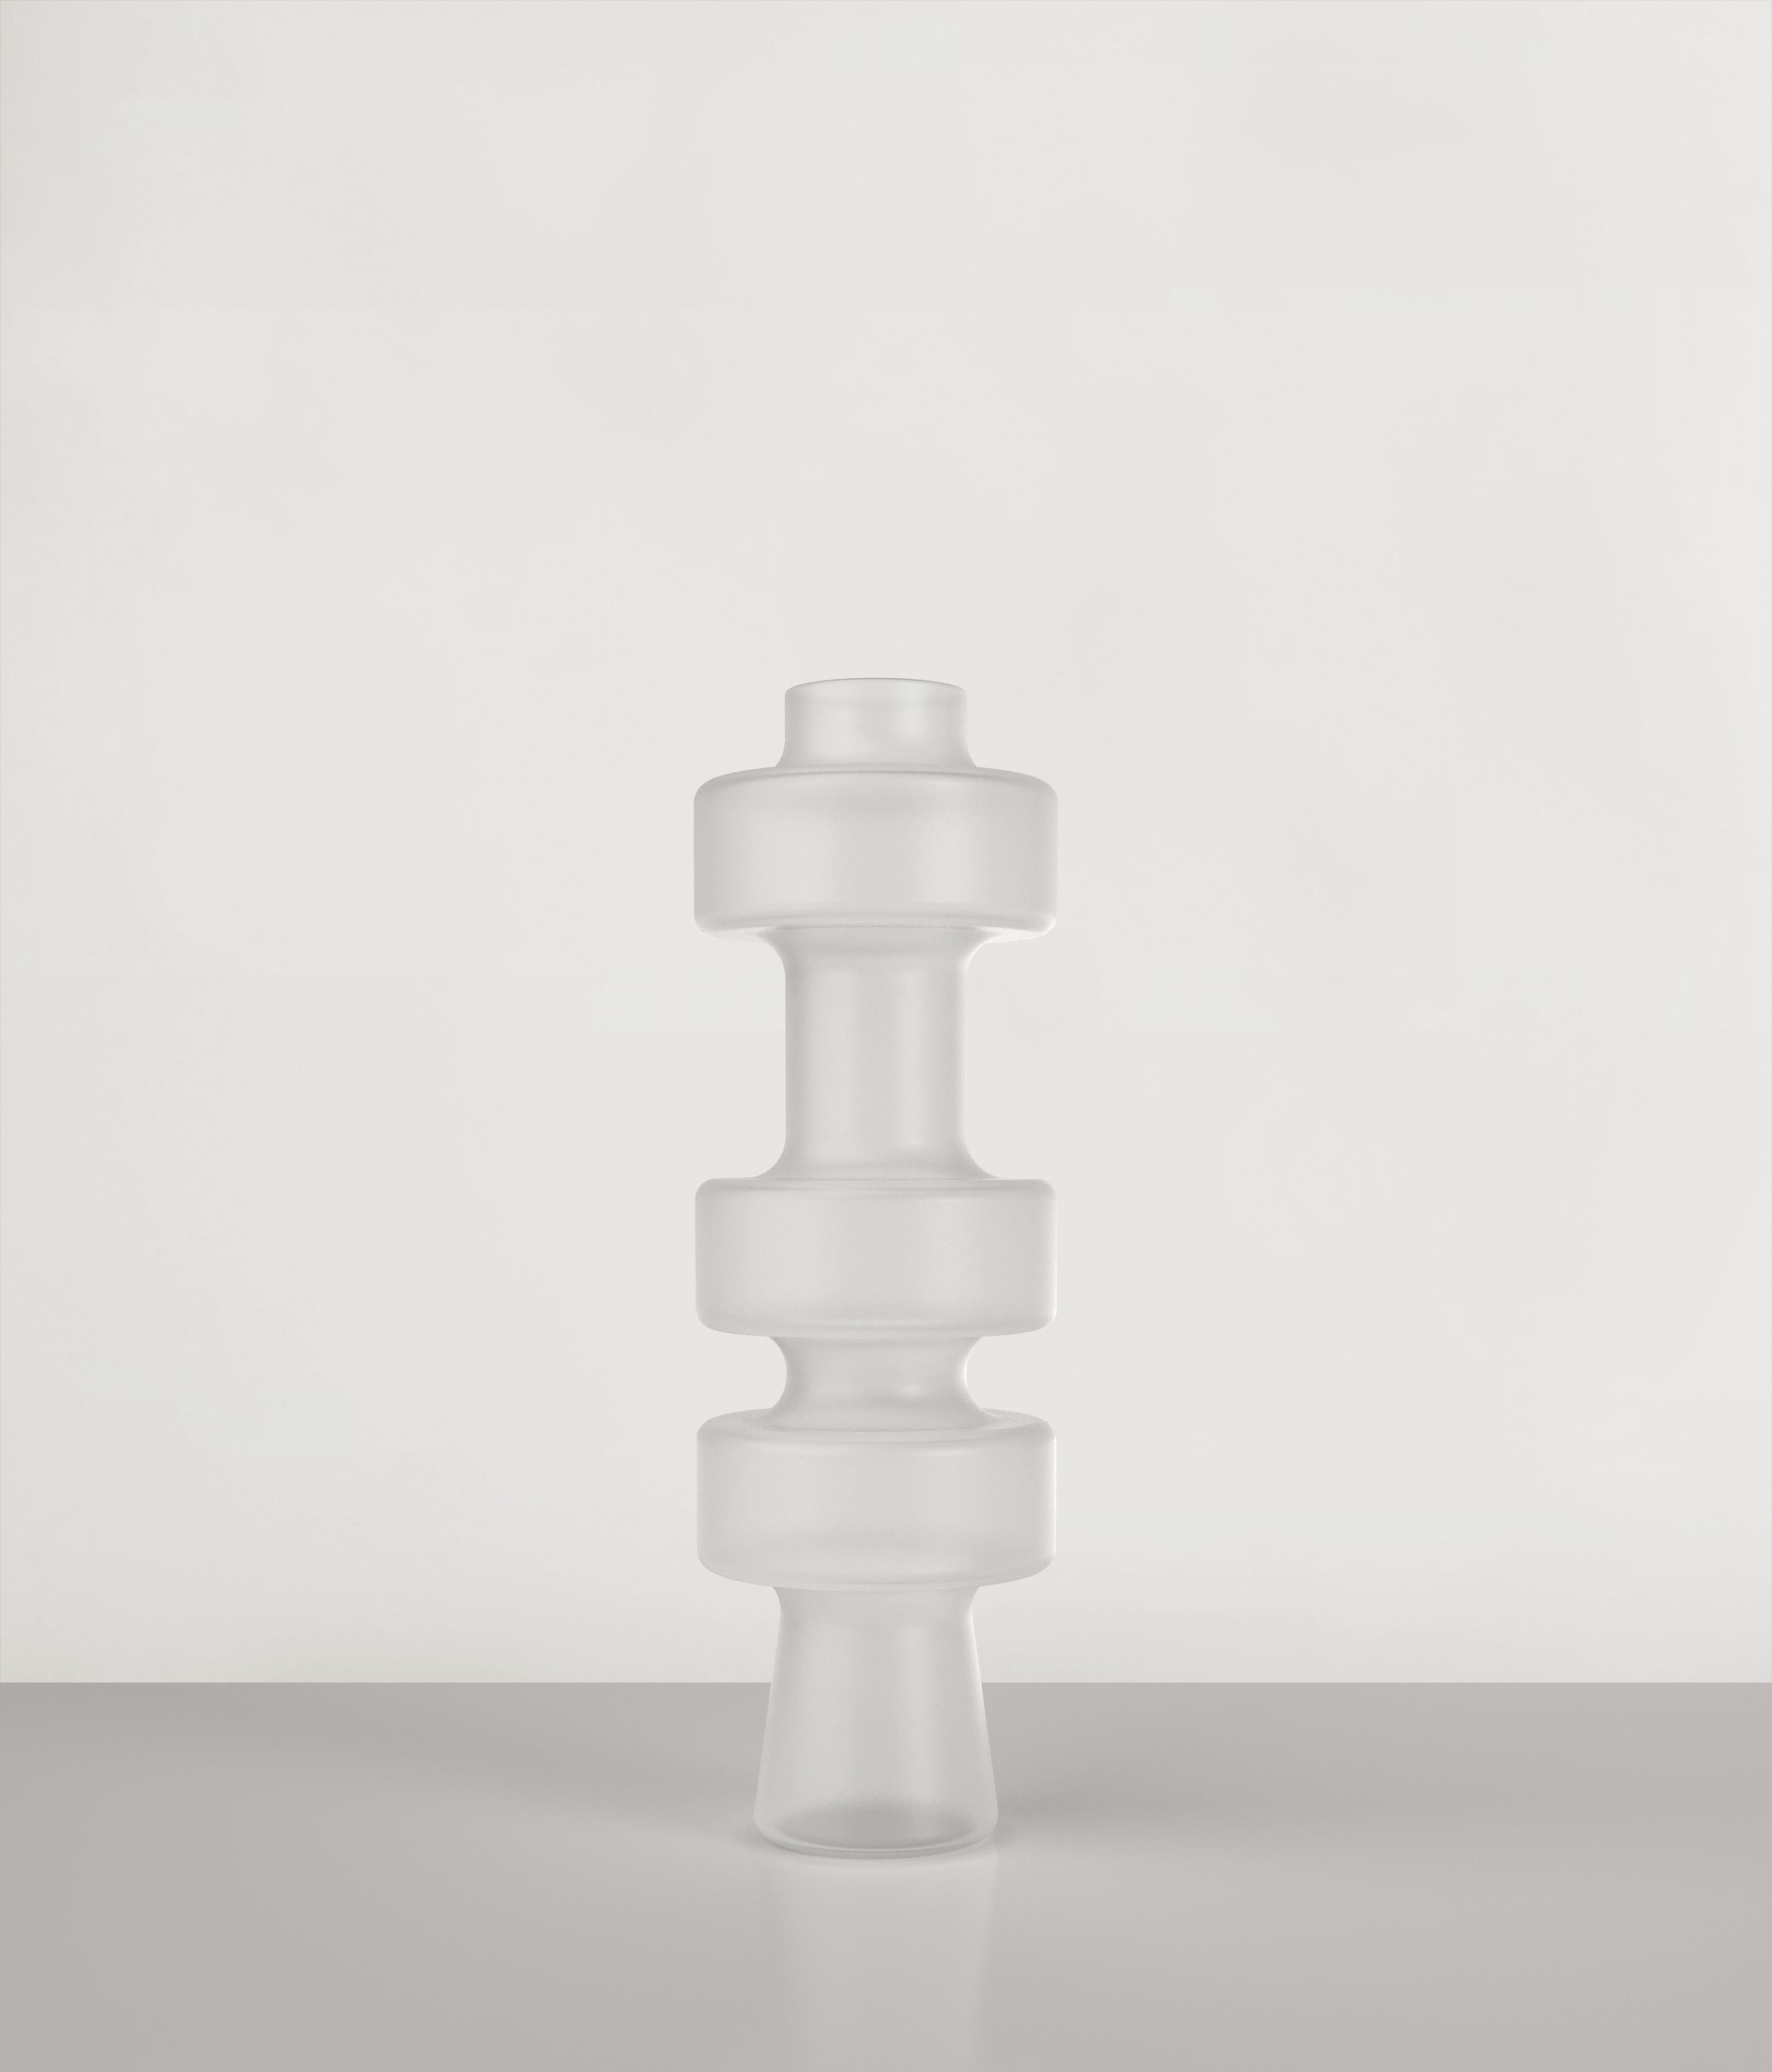 Uppa V3 vase by Edizione Limitata
Limited Edition of 1000 pieces. Signed and numbered.
Dimensions: D12 x H38 cm
Materials: sanded glass

Uppa is a series of 21st Century sculptural vases made by Italian artisans in blown sanded glass. The piece is